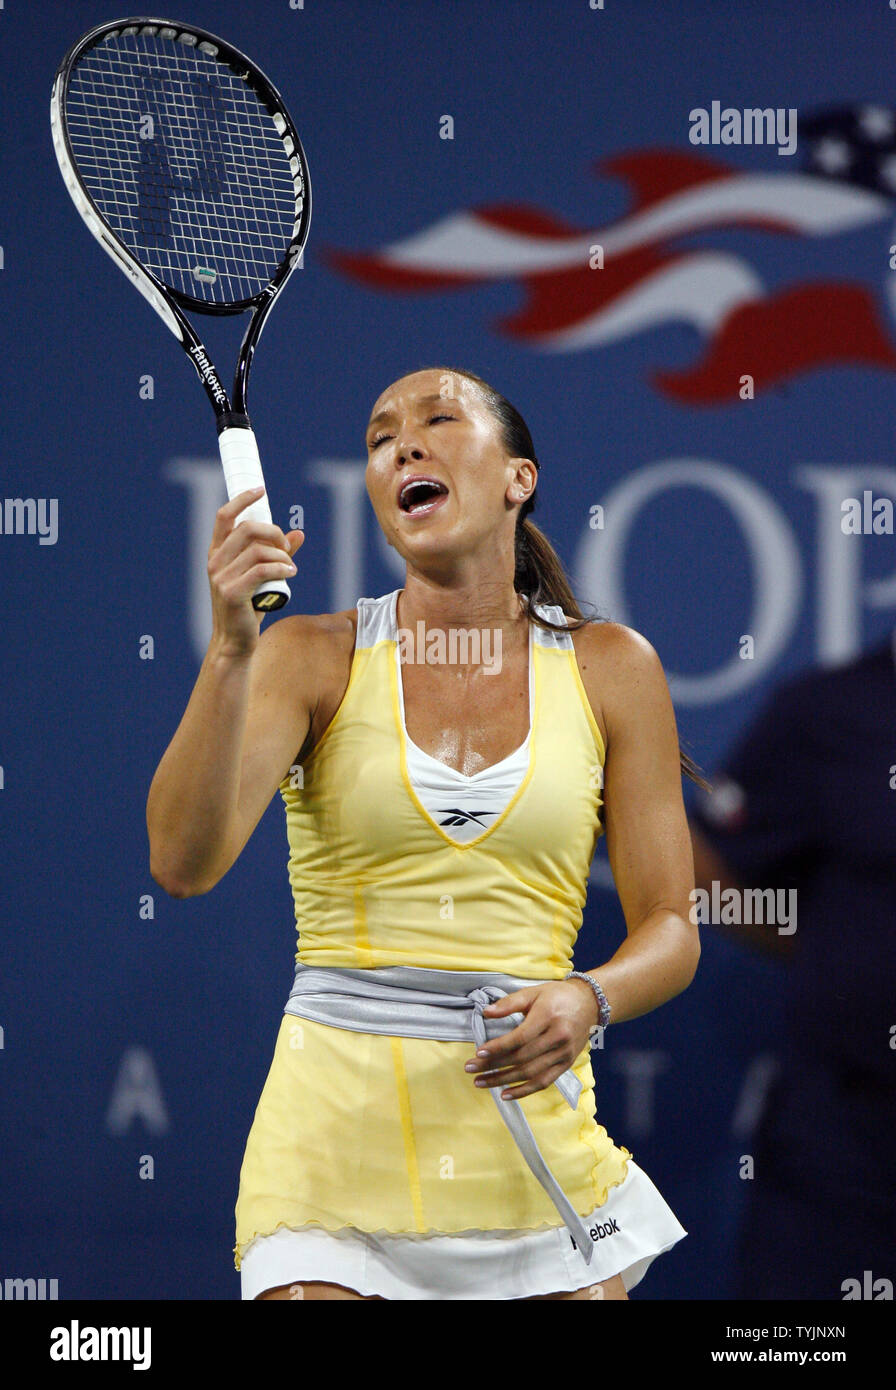 Jelena Jankovic reacts after losing a point in her women's final match  against Serena Williams on day fourteen at the U.S. Open Tennis  Championships at the U.S. National Tennis Center in Flushing